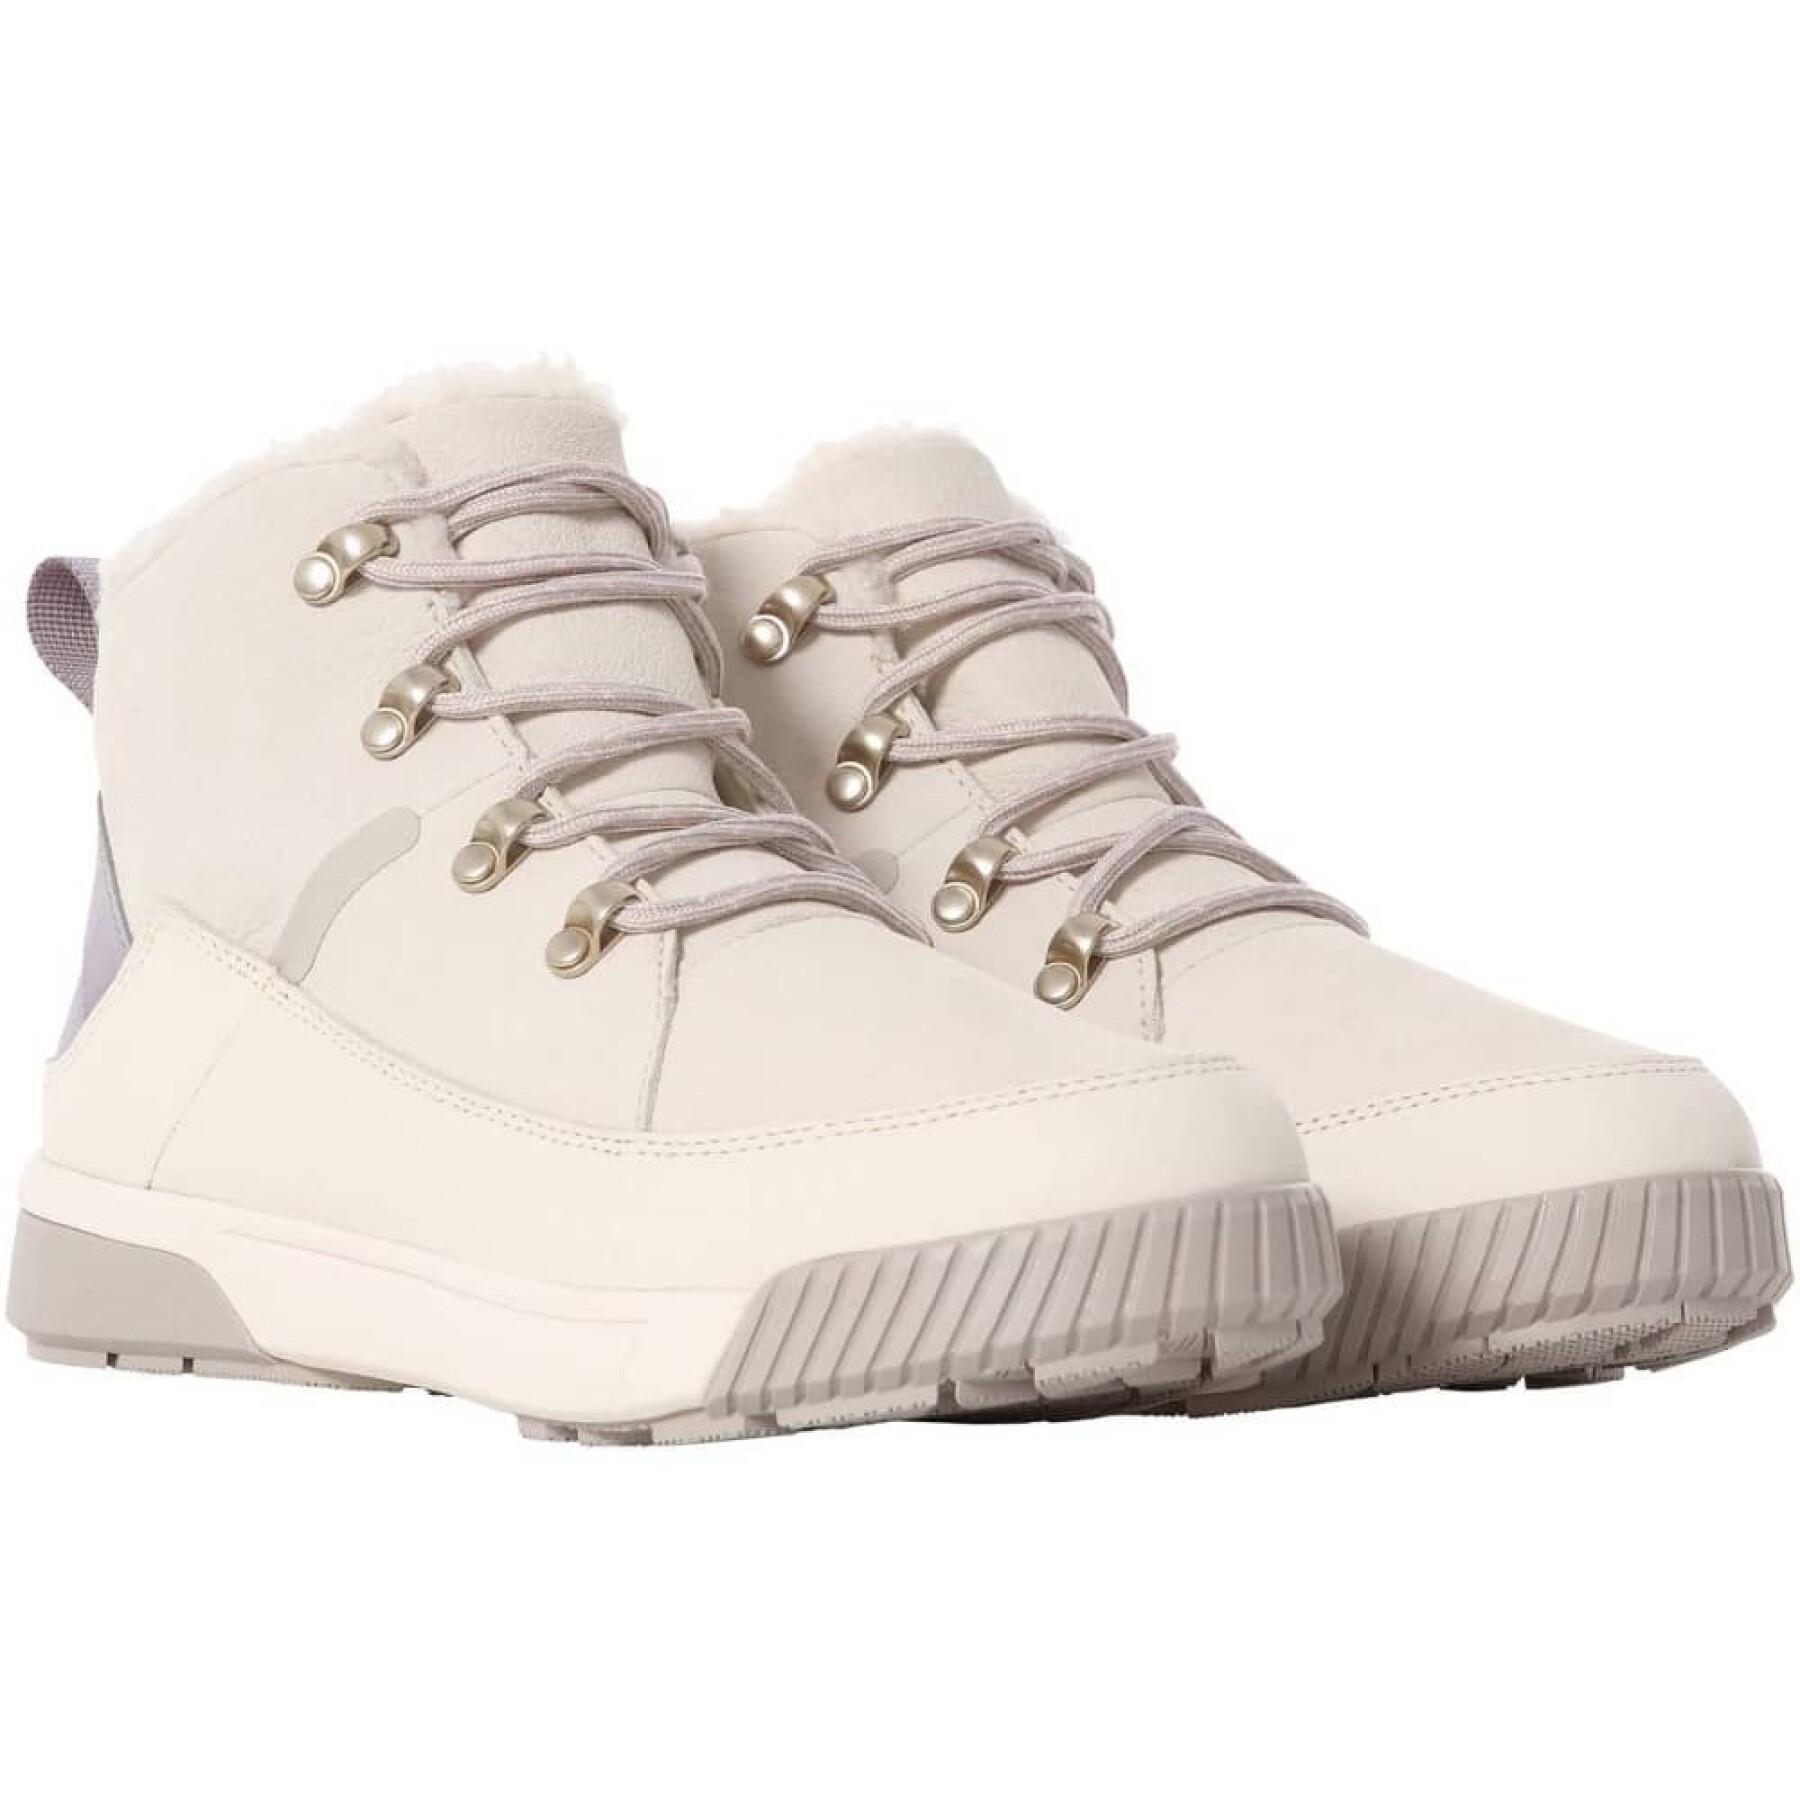 Botas de mujer The North Face Sierra mid lace